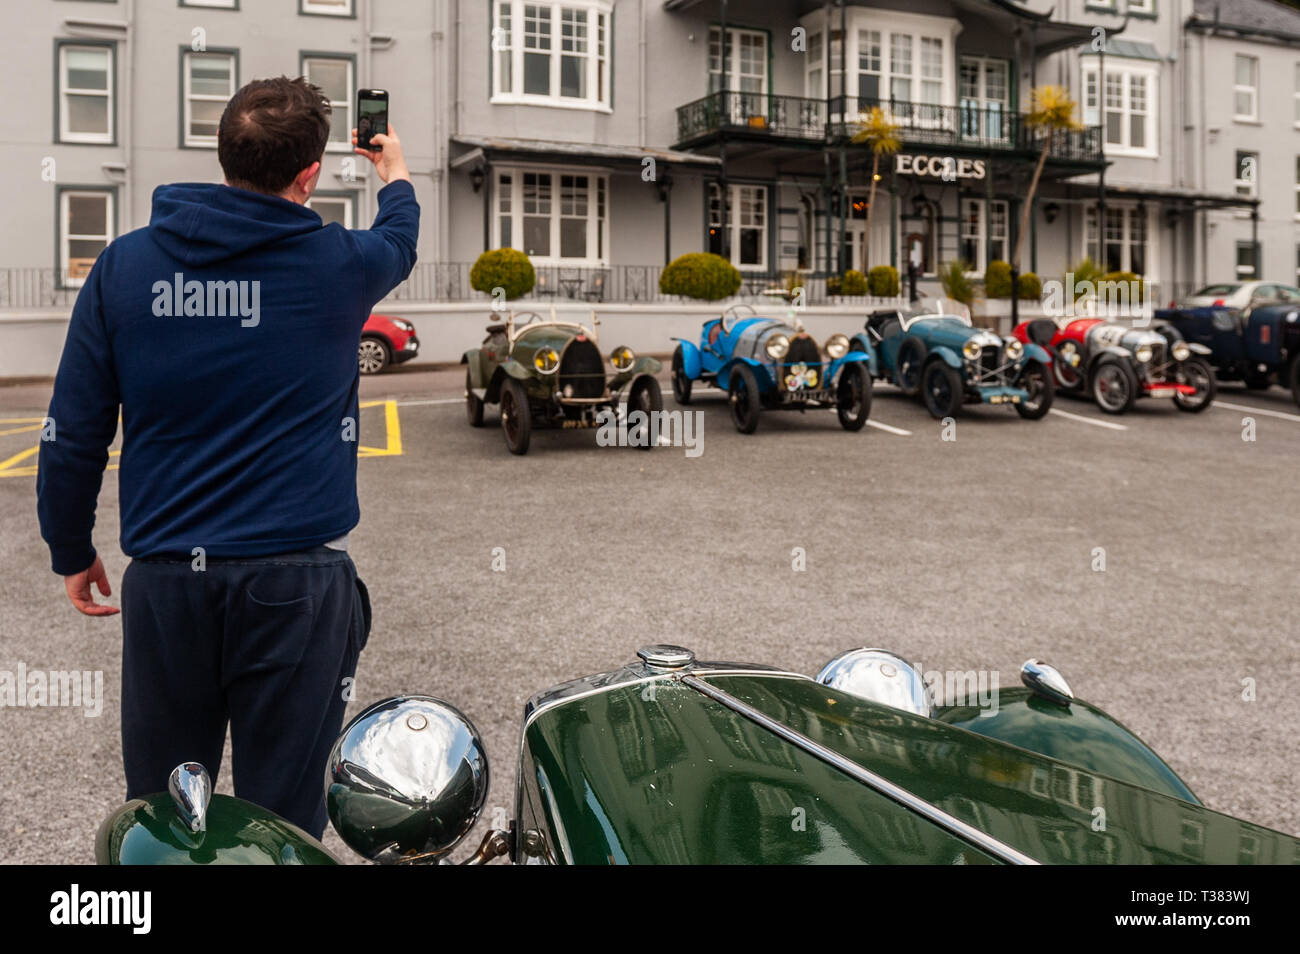 Glengarriff, West Cork, Ireland. 7th Apr, 2019. The French car club 'Amilcar' is currently on a 6 day tour of Ireland.  The club made a stop at the Eccles Hotel, Glengarriff this afternoon. Ian McGregor from Cork took a selfie with a vintage MG. Credit: Andy Gibson/Alamy Live News. Stock Photo